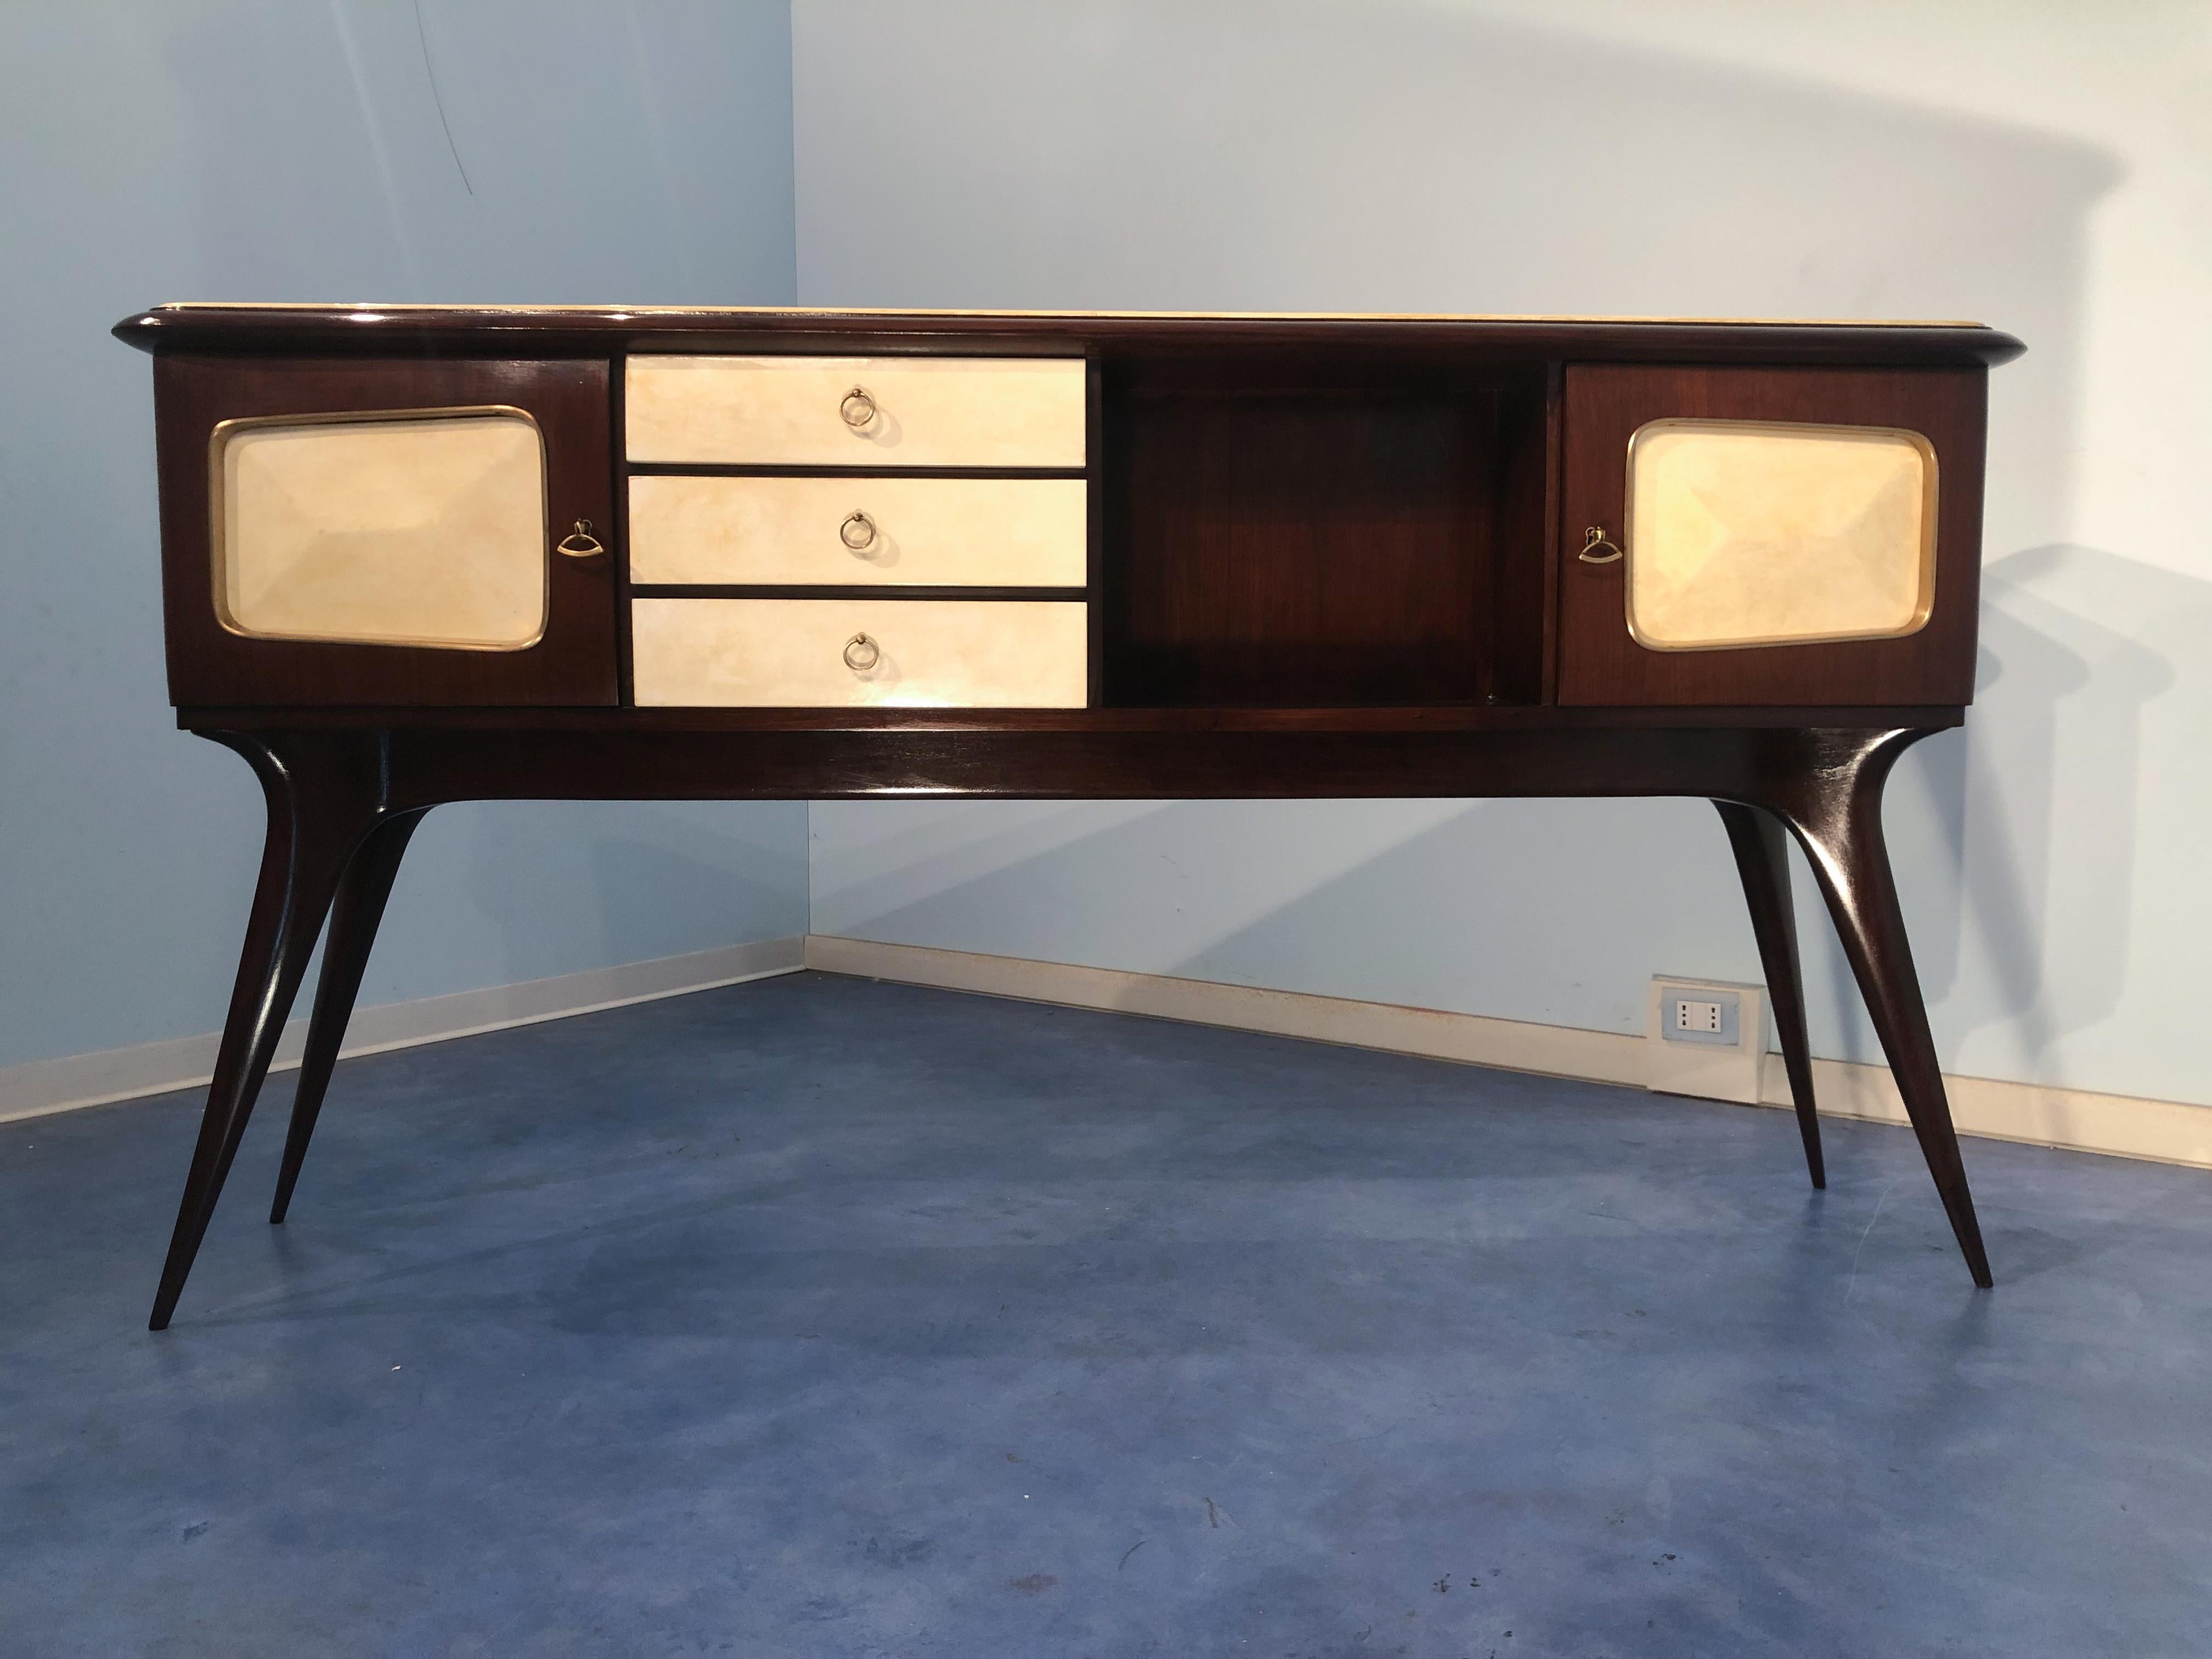 Stilysh Italian mid-century center sideboard, attributed to Guglielmo Ulrich produced in the 1950s. The sideboard is made of walnut and precious parchment paper. This piece is finished on both sides and can be used in the most varied ways. You can